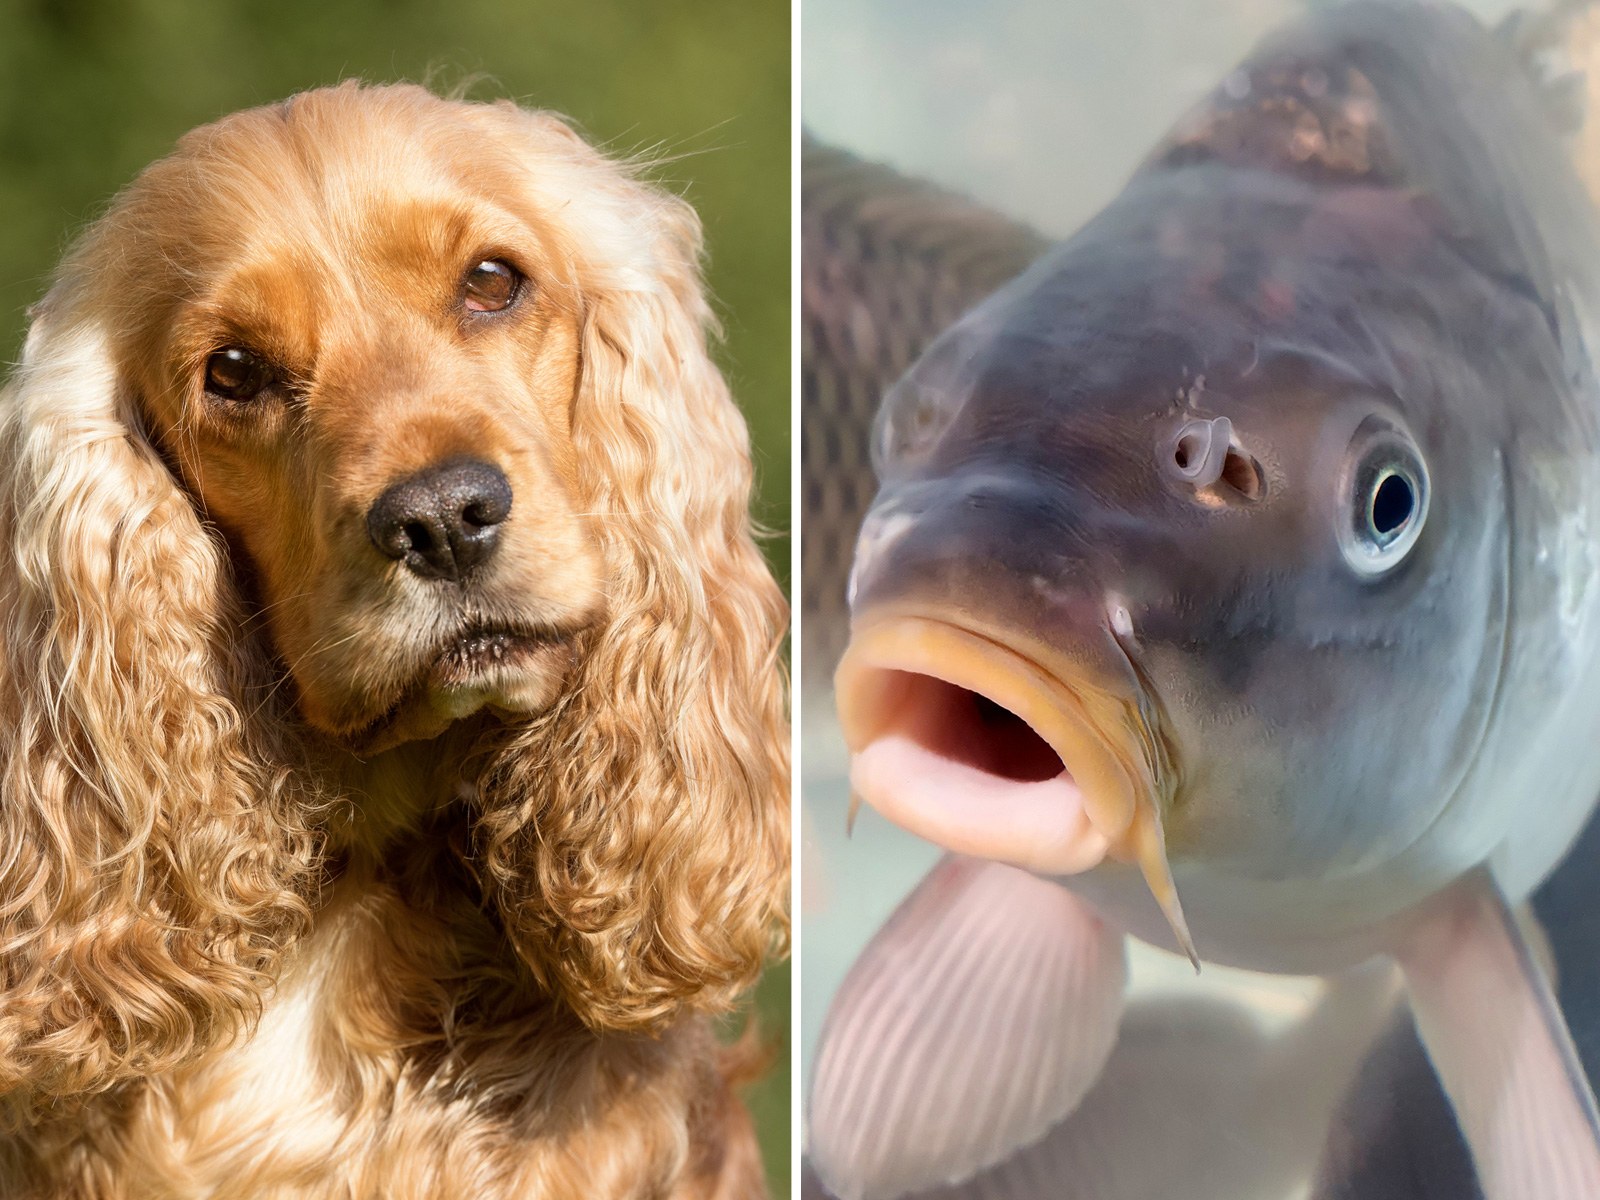 Why Does My Dog Smell Like Fish?': The Disease and How To Get Rid of It